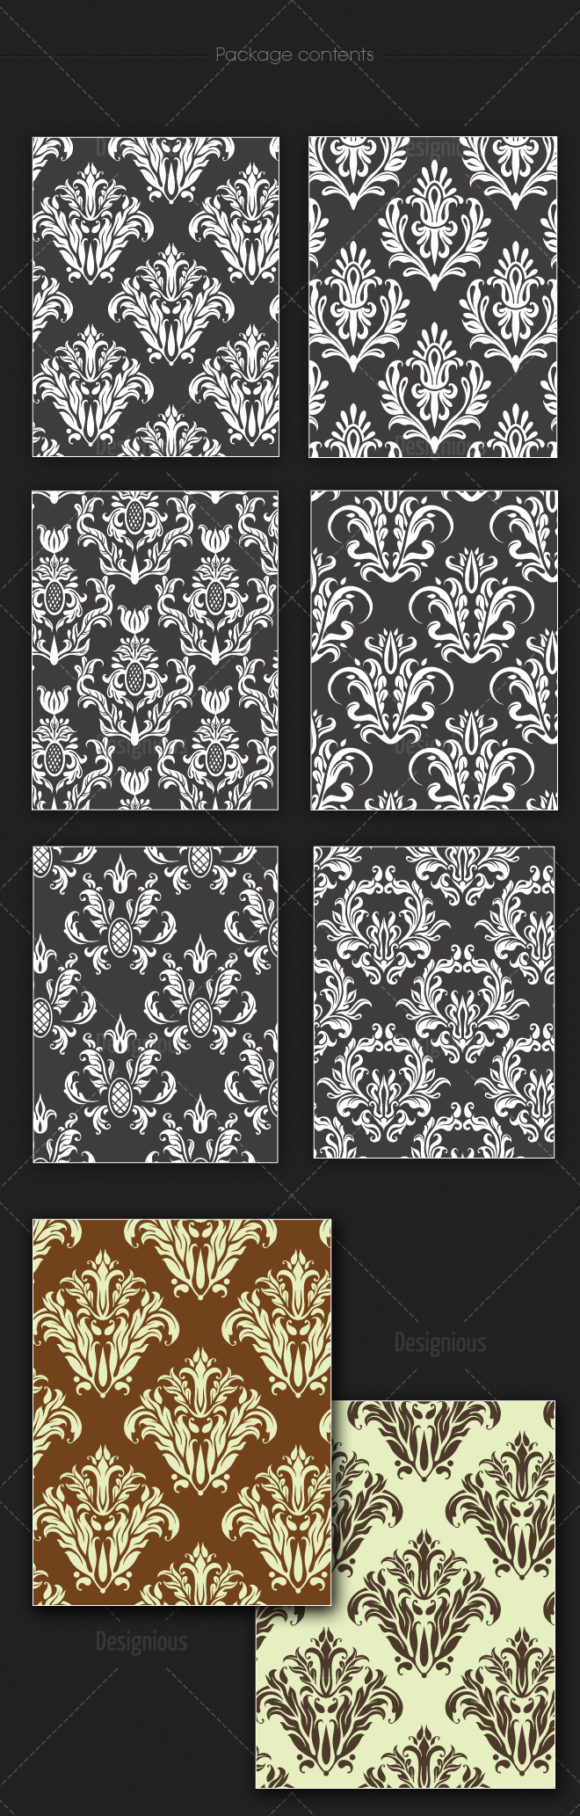 Seamless Patterns Vector Pack 134 2